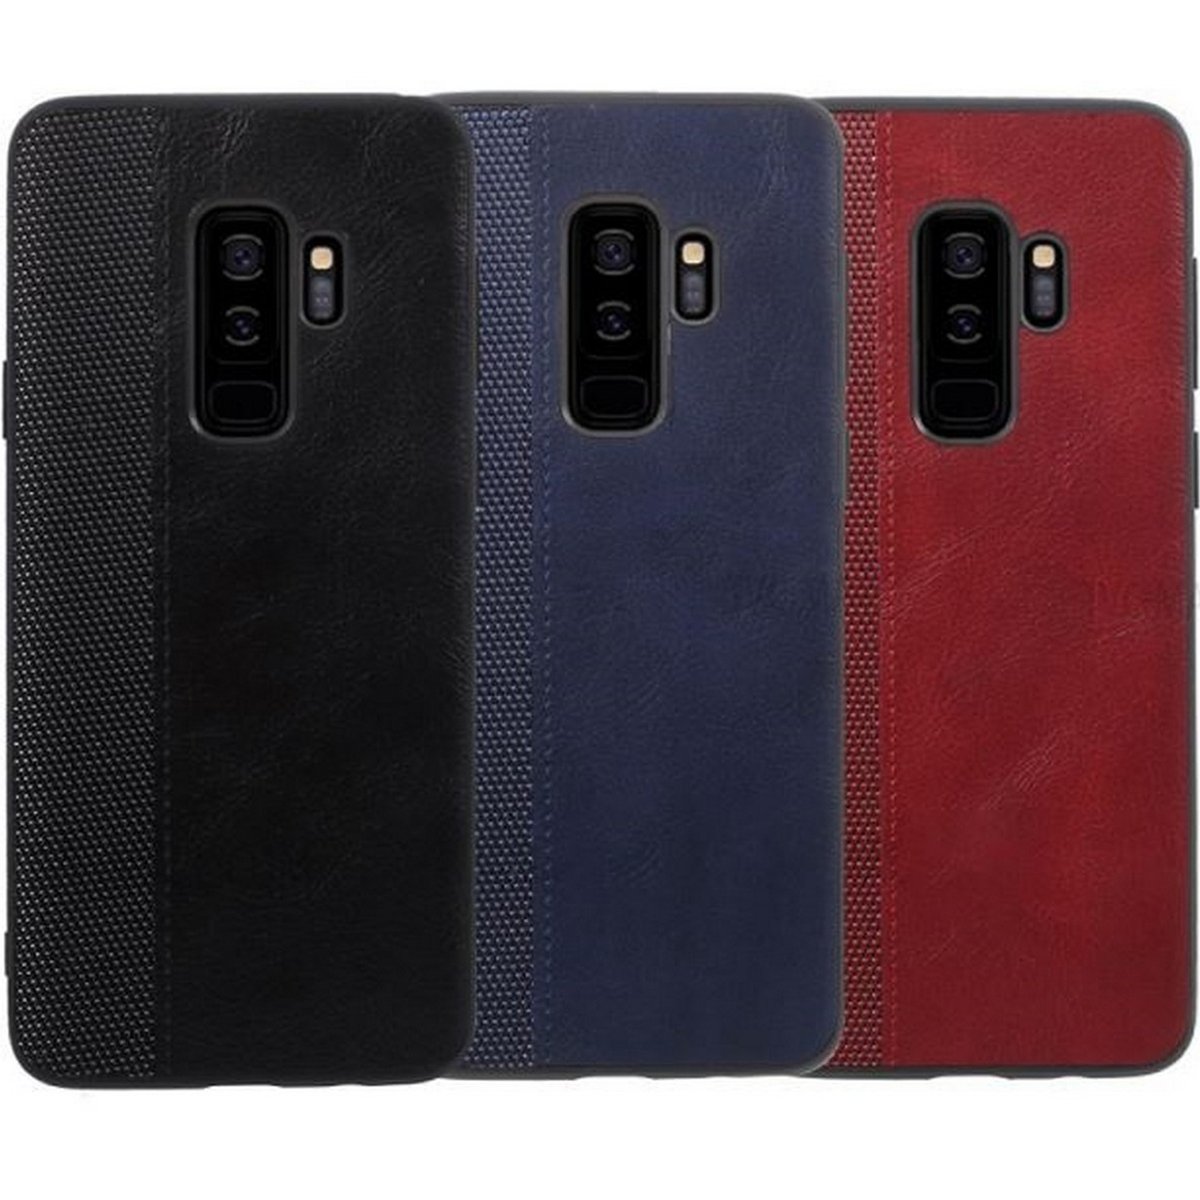 Trands Galaxy S9 Plus Professional Leather Back Case TR-CC2347 Assorted Color 1pc